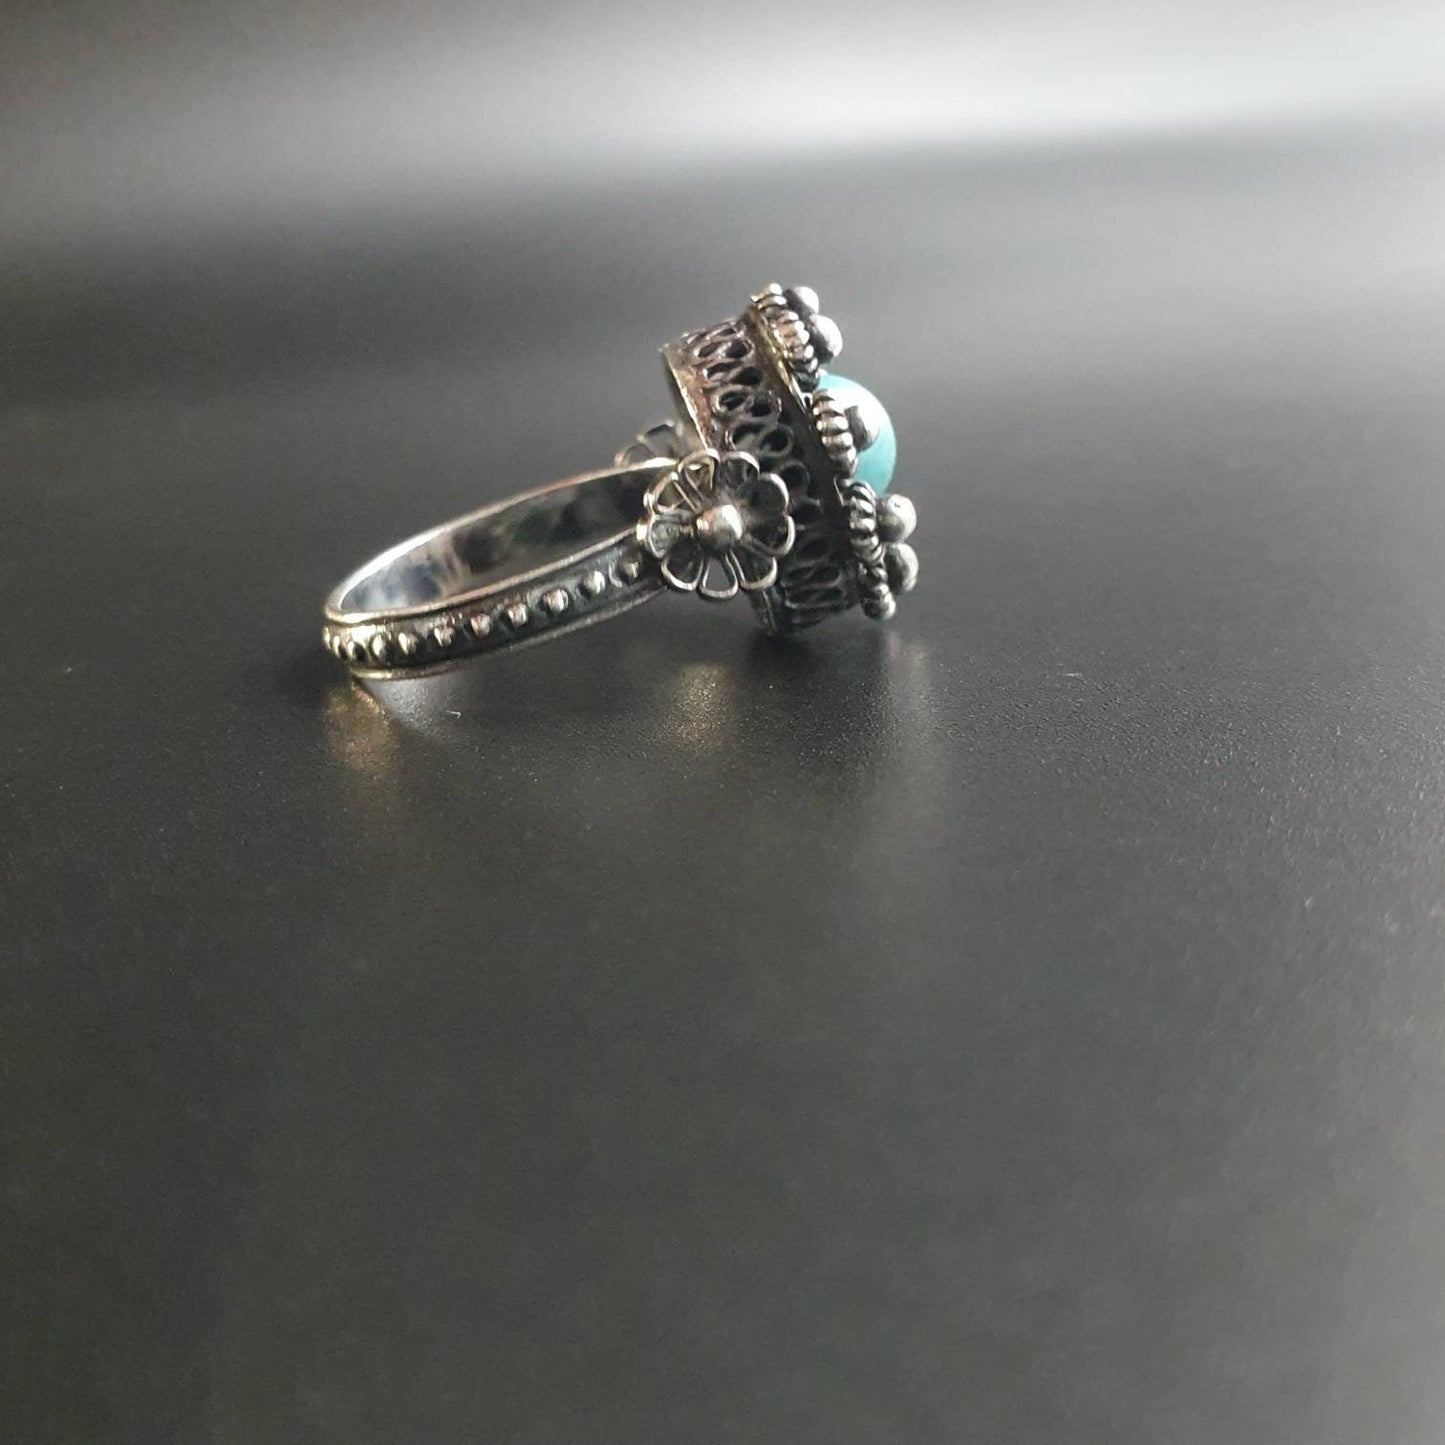 Antique ring, sterling silver ring, statement ring, turquoise, blue, gothic Ring, tribal jewelry, sterling, gift's, vintage,